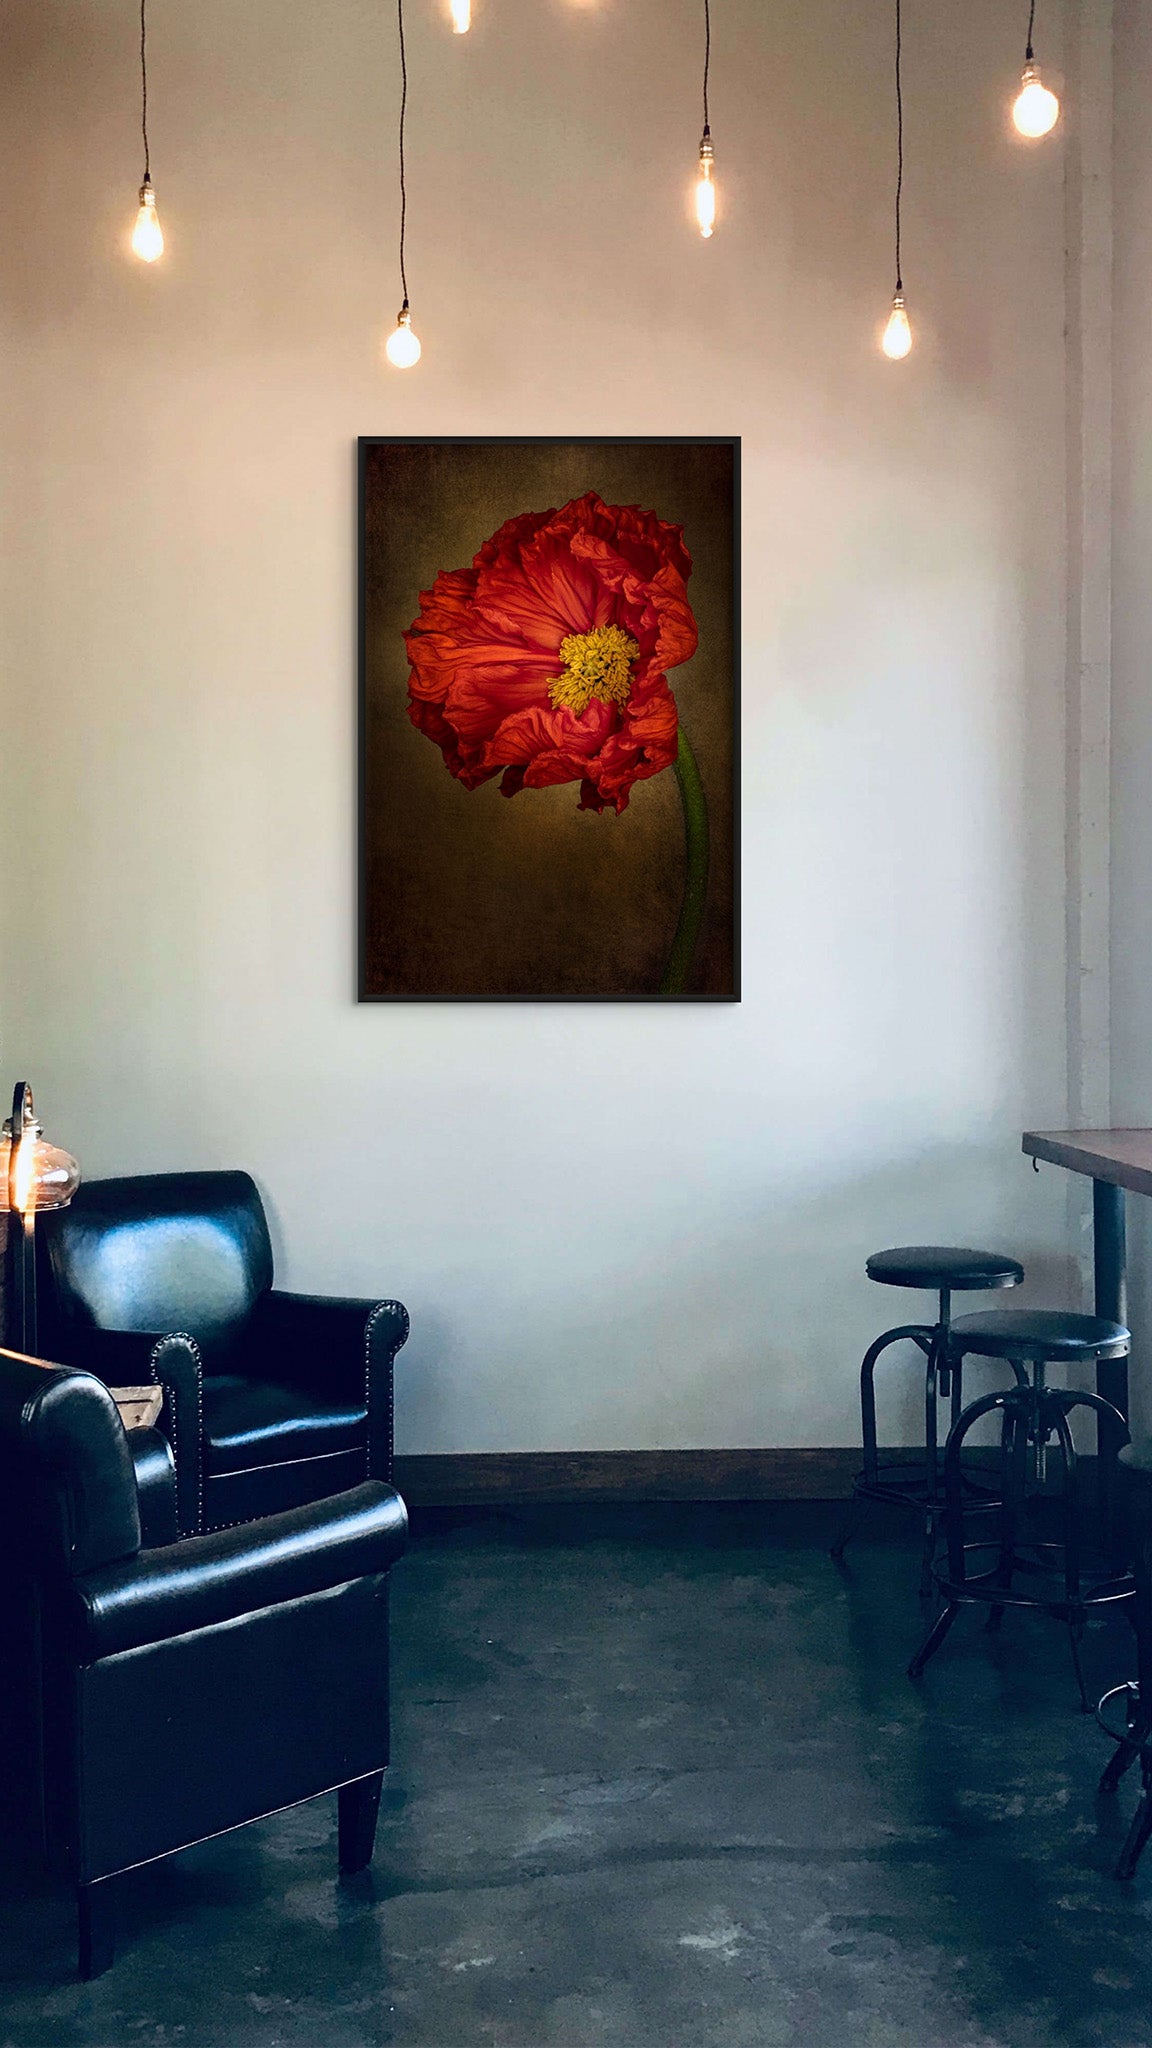 Picture hanging on the wall of a coffee shop. The picture is a fine art flower photography titled "Confidence" by Dreaux Fine Art. 